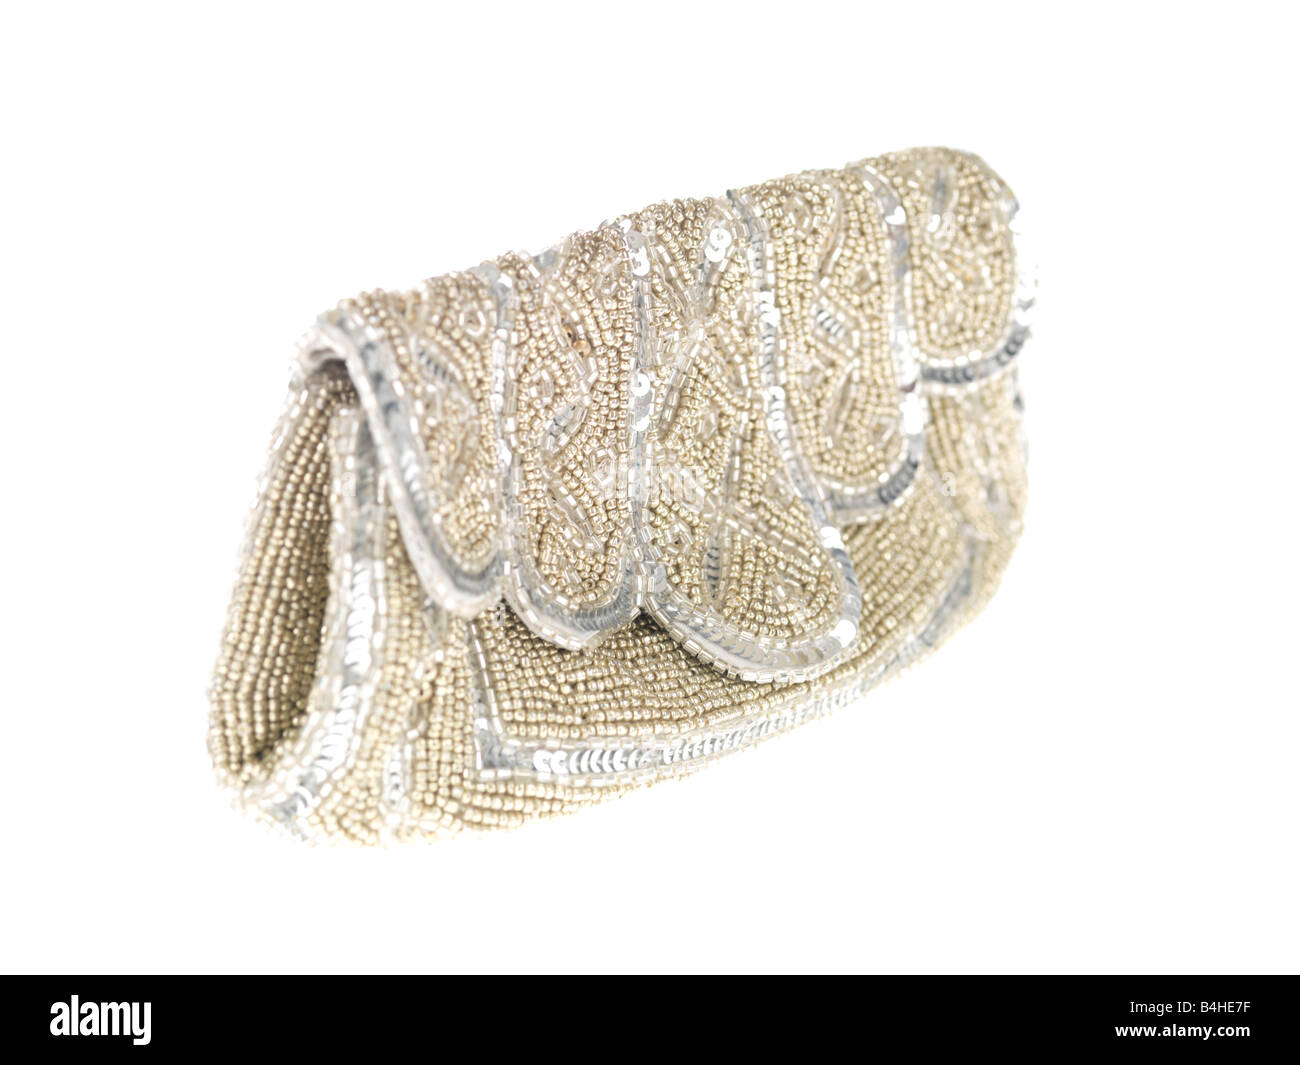 Clutchbag Cut Out Stock Images & Pictures - Alamy